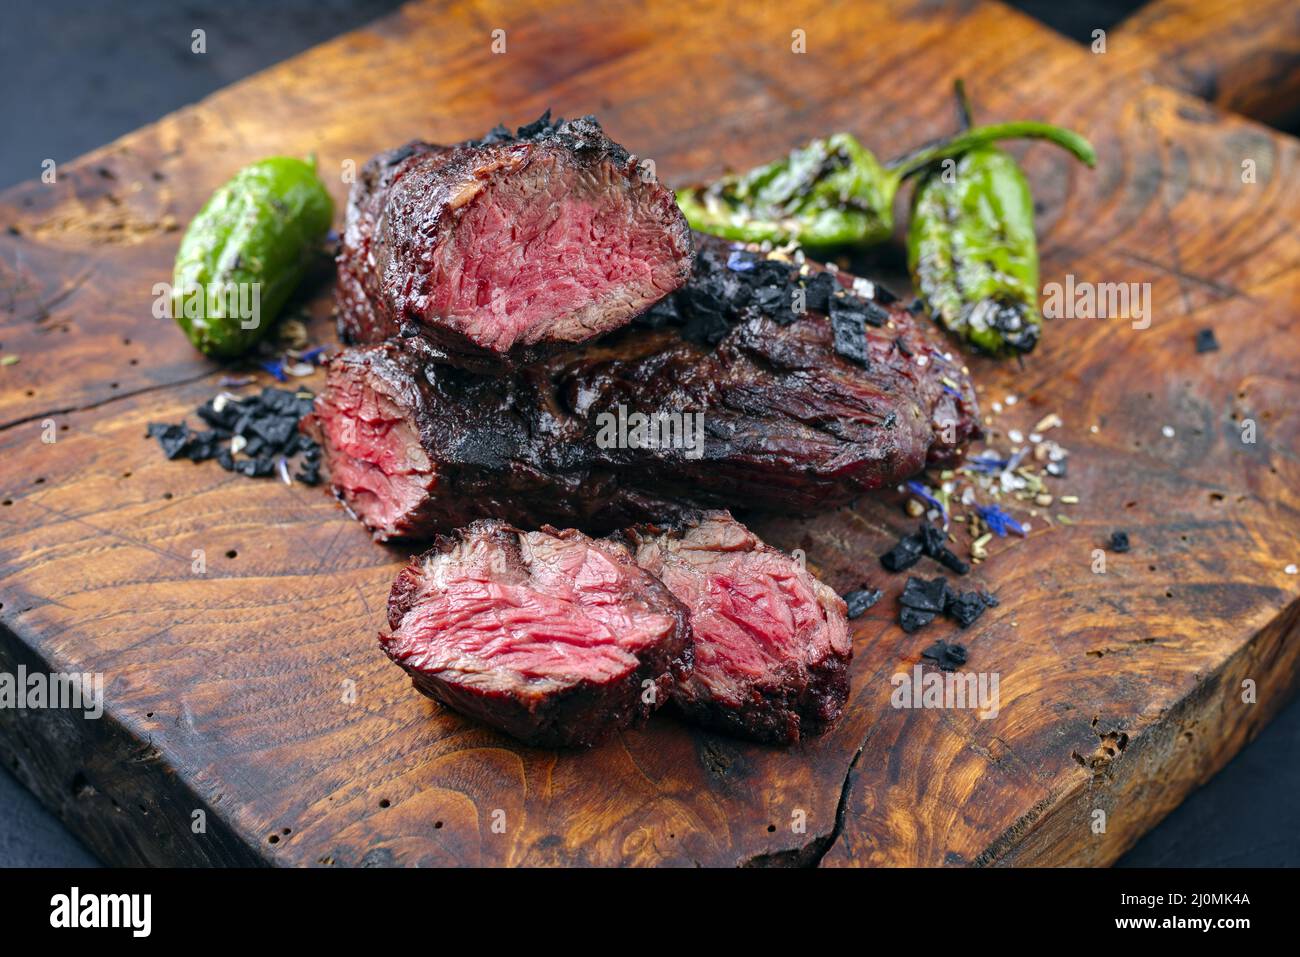 Traditional barbecue wagyu onglet steak with green chili and spices served as close-up on a rustic wooden board Stock Photo